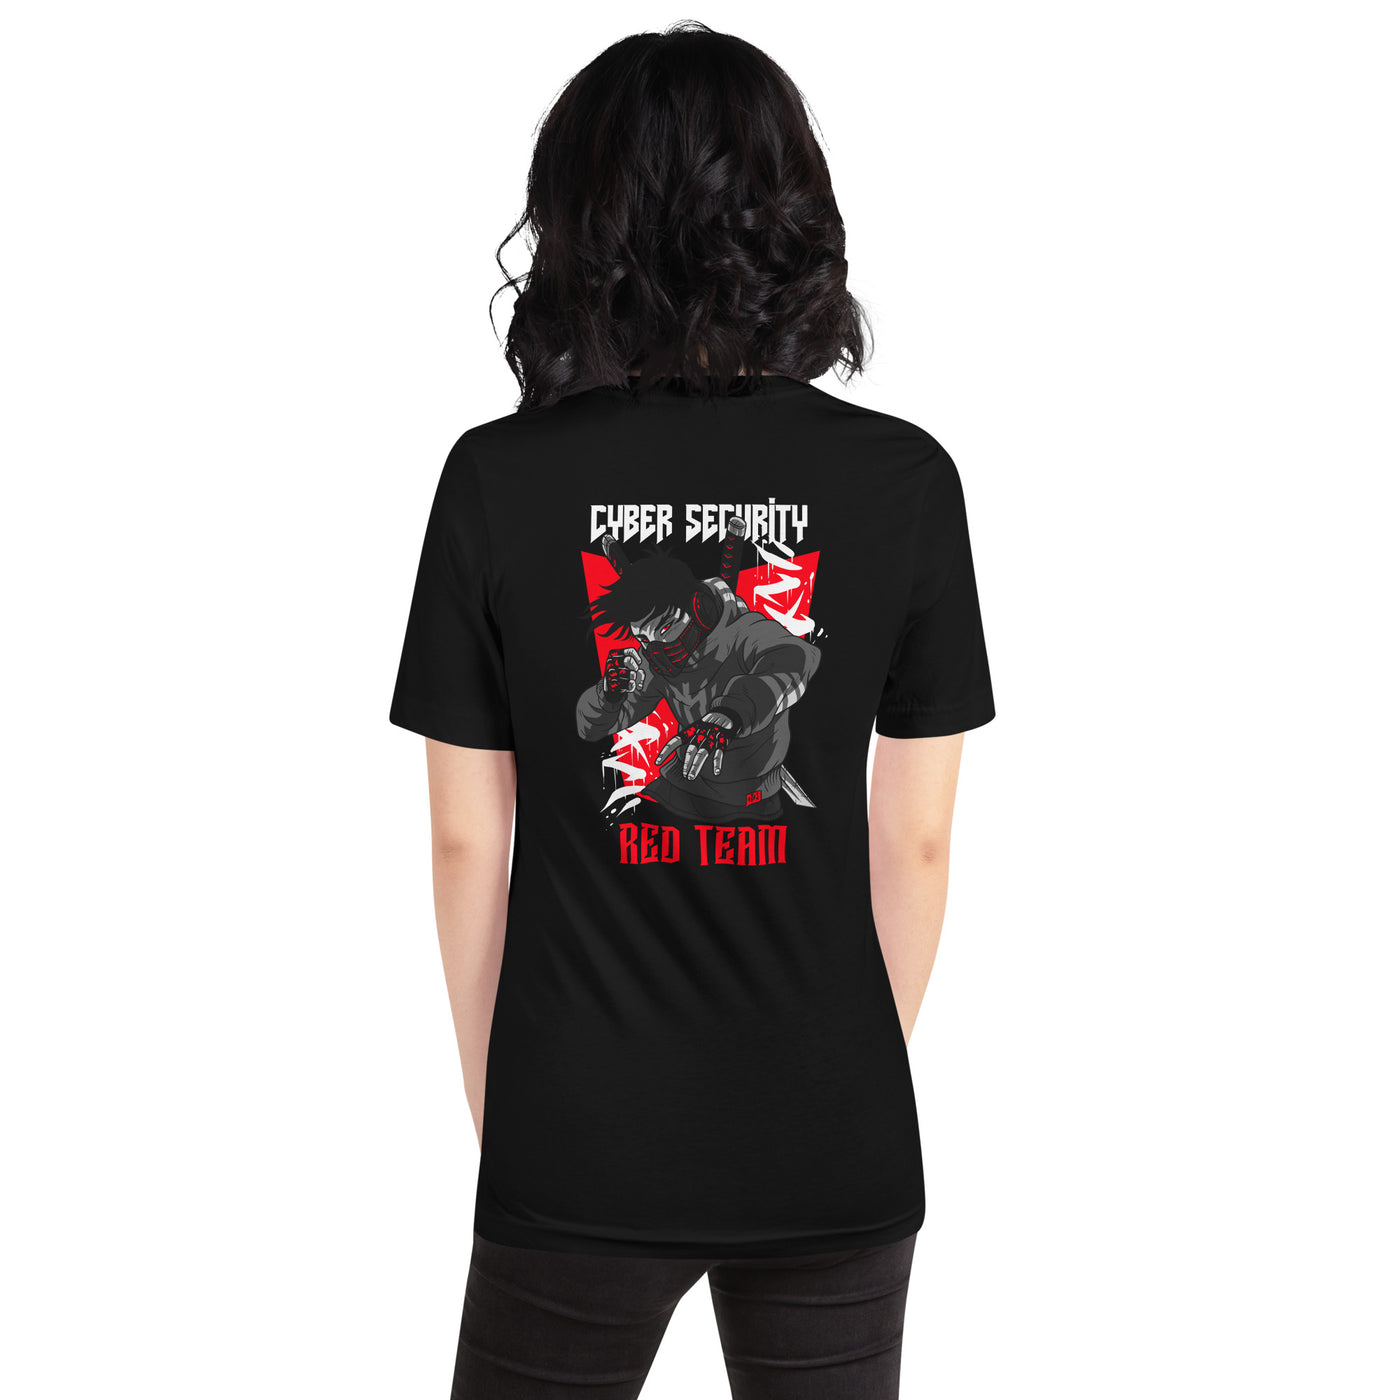 Cyber Security Red Team V3 - Unisex t-shirt ( Back Print )